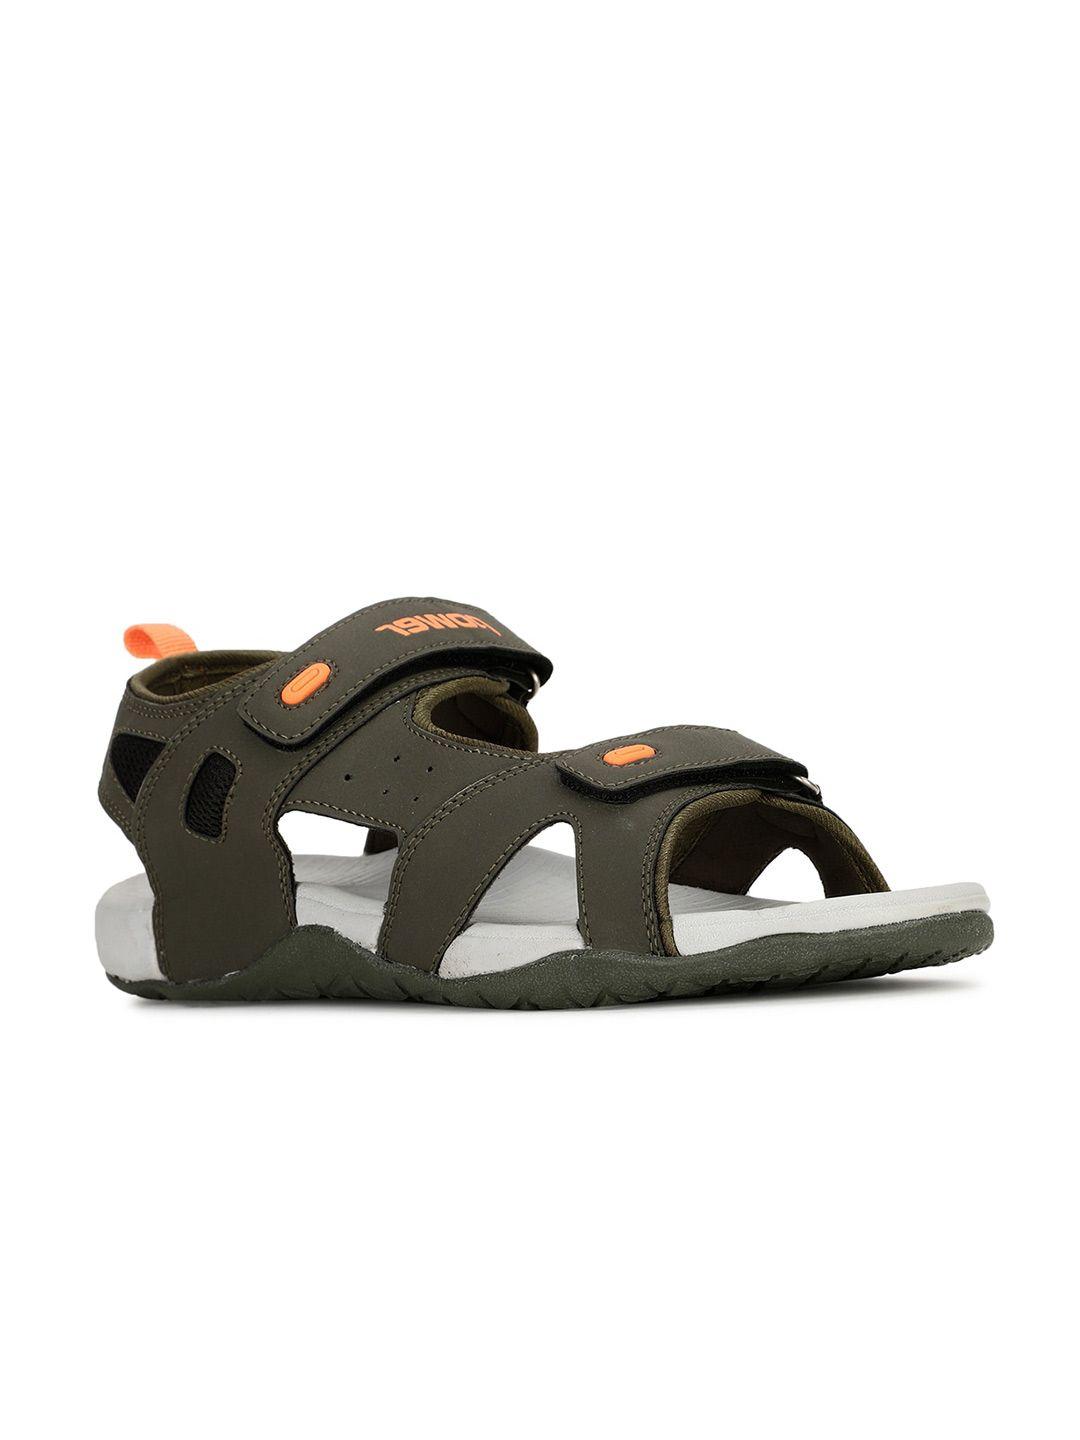 power men abbey sports sandals with velcro closure